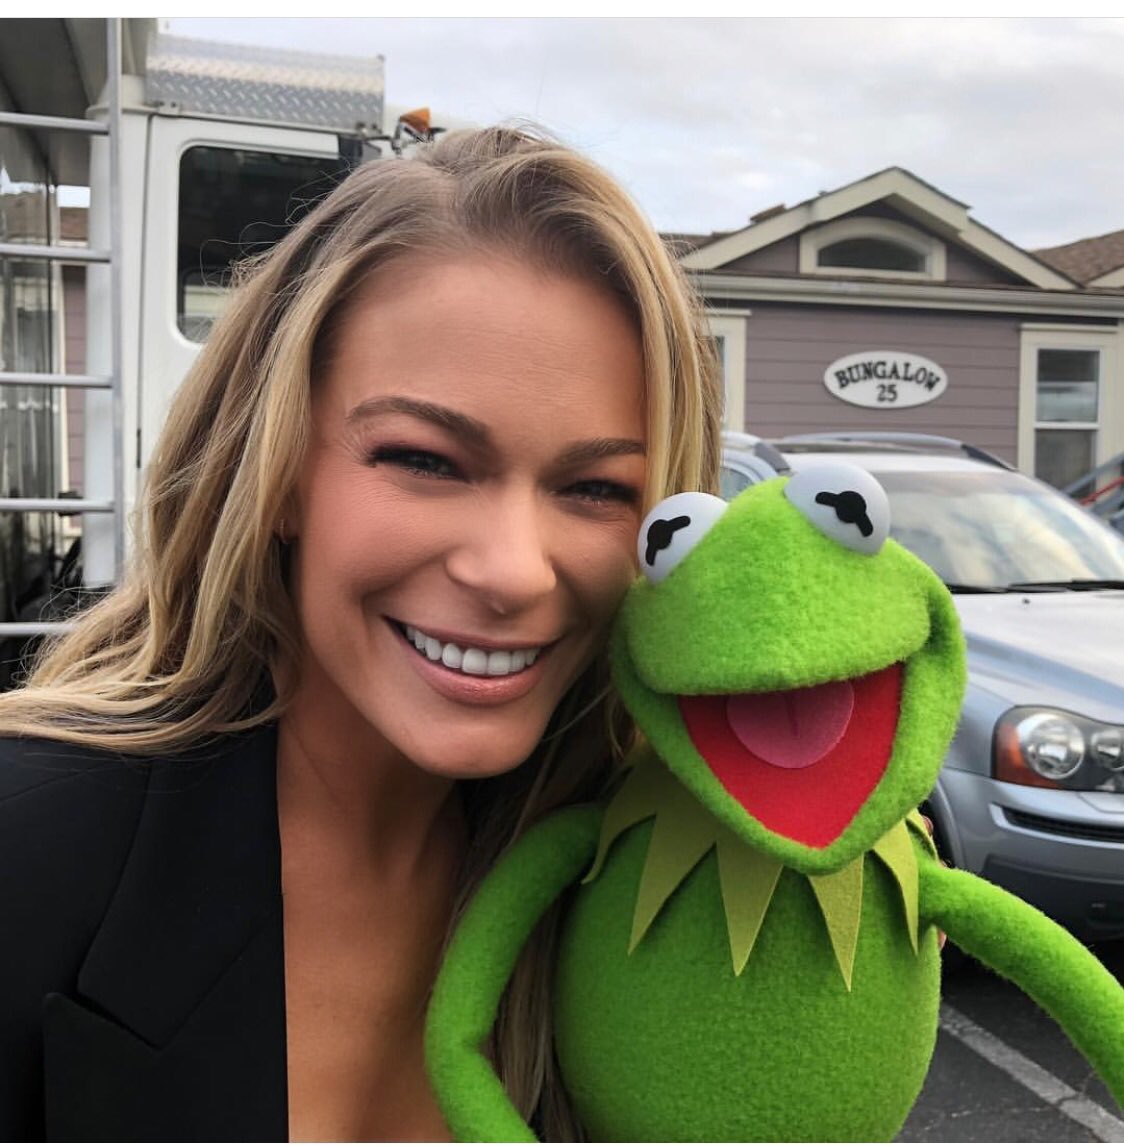 Who needs the frog to turn into a prince when it’s @KermitTheFrog! 
#kermitthefrog #themuppets #americanidol https://t.co/1zzZBKZaac